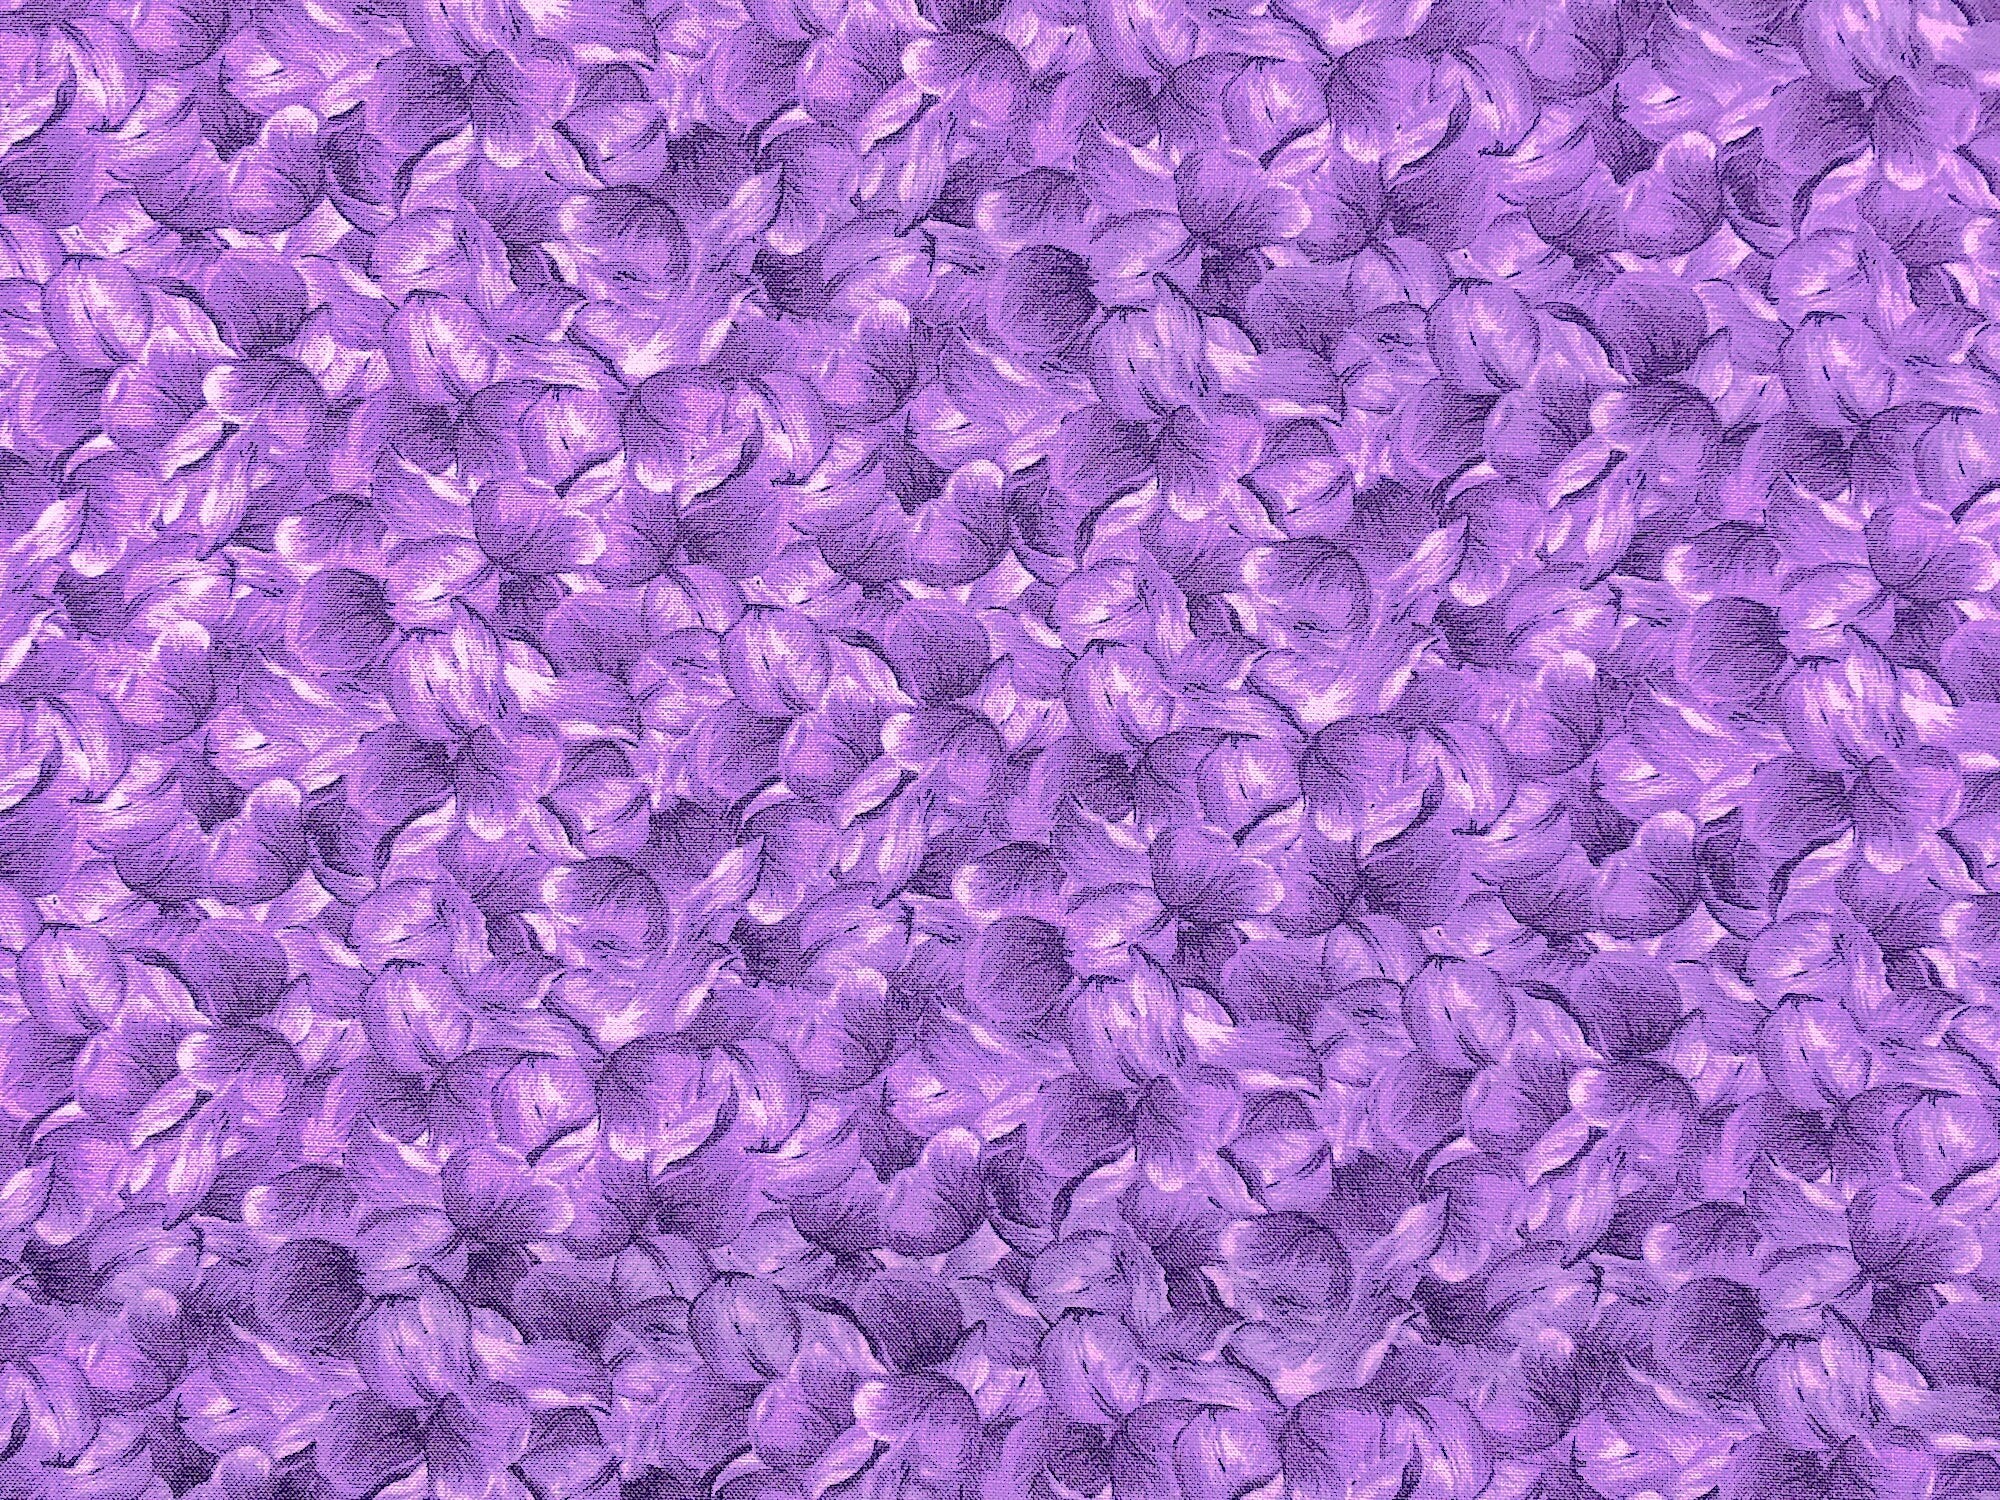 This fabric is a part of the Elegant Blooms collection and is covered in flower petals